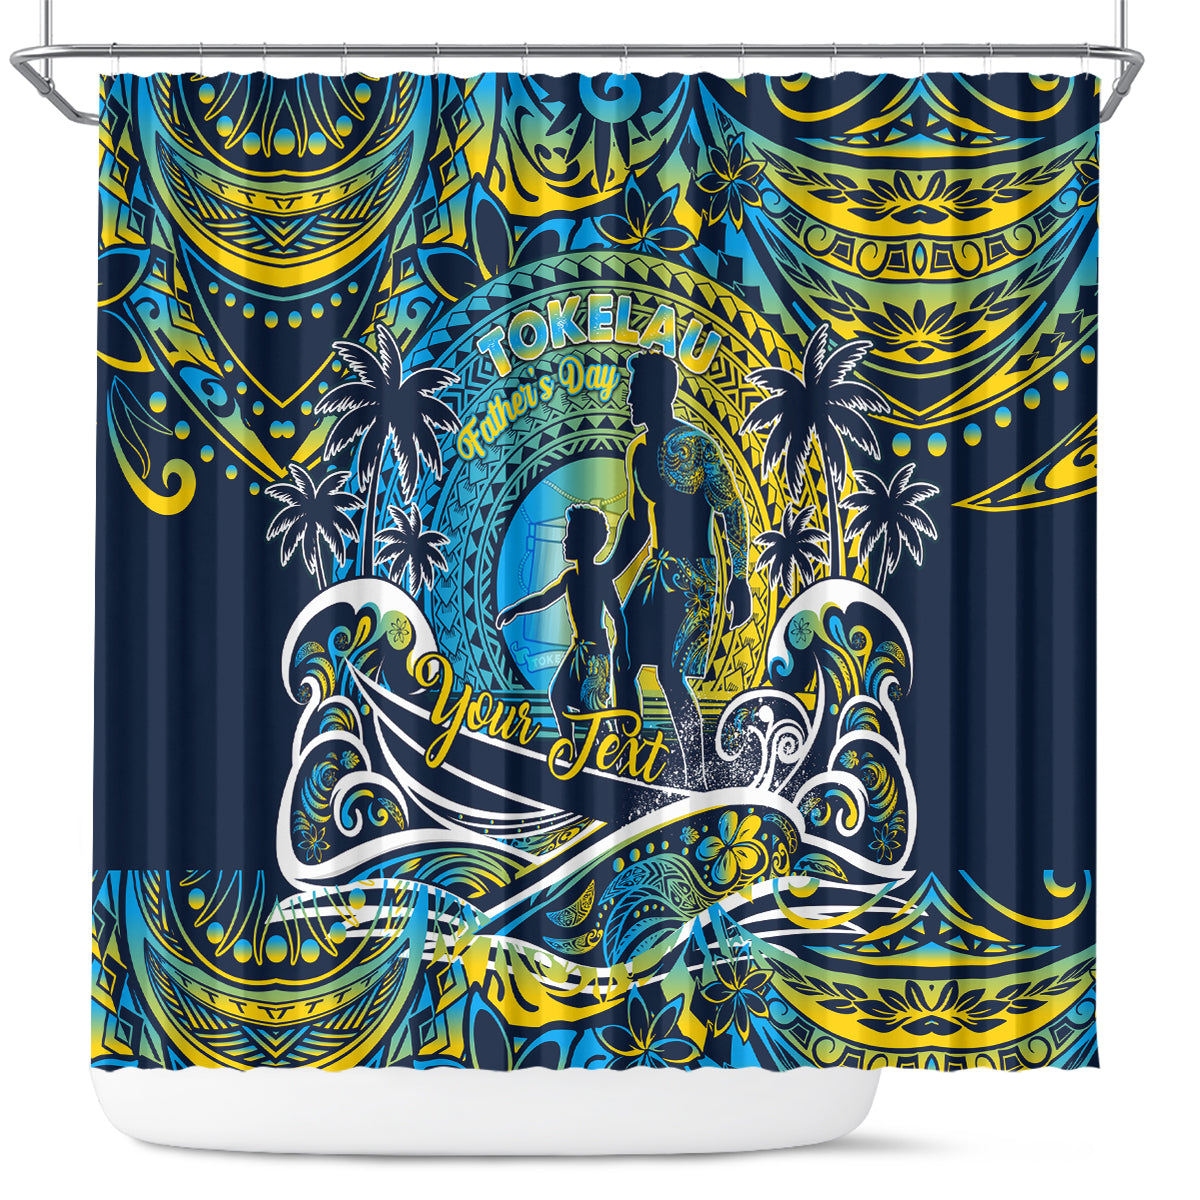 Father's Day Tokelau Shower Curtain Special Dad Polynesia Paradise